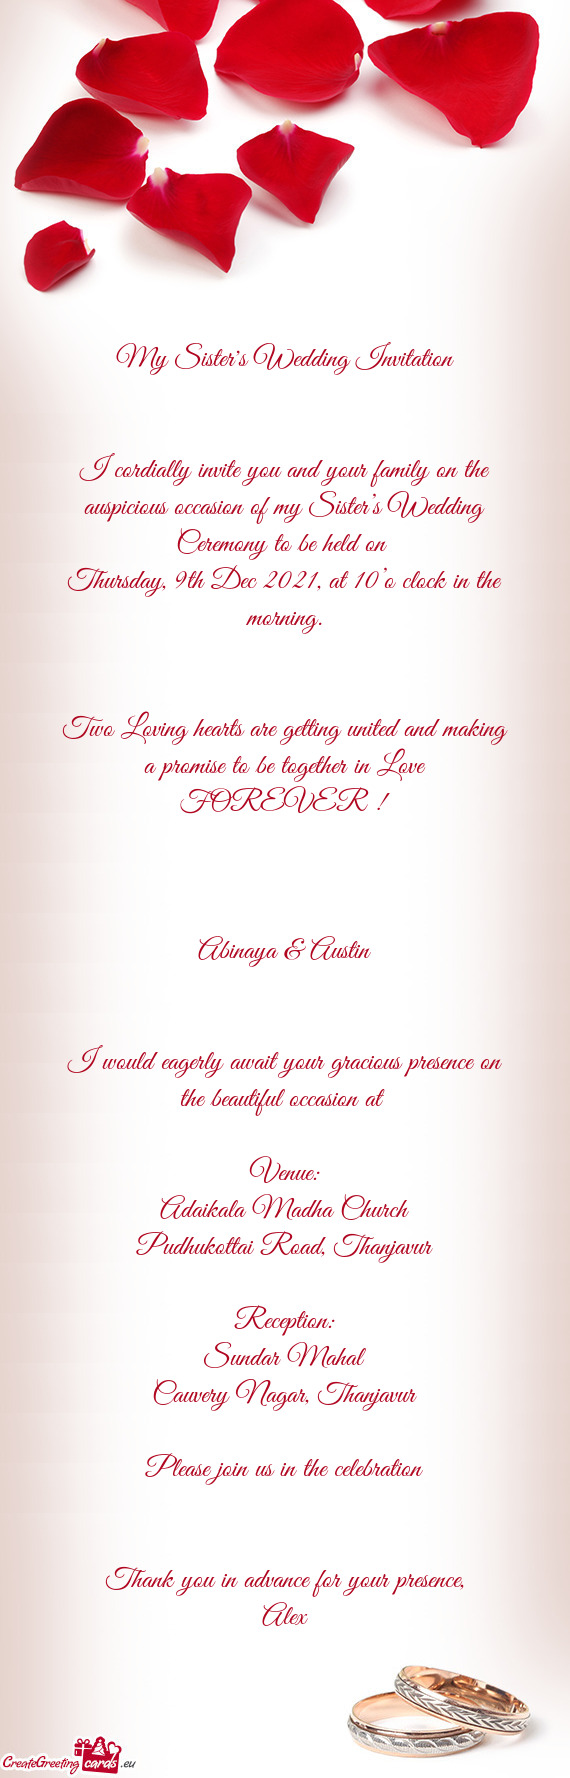 I cordially invite you and your family on the auspicious occasion of my Sister’s Wedding Ceremony